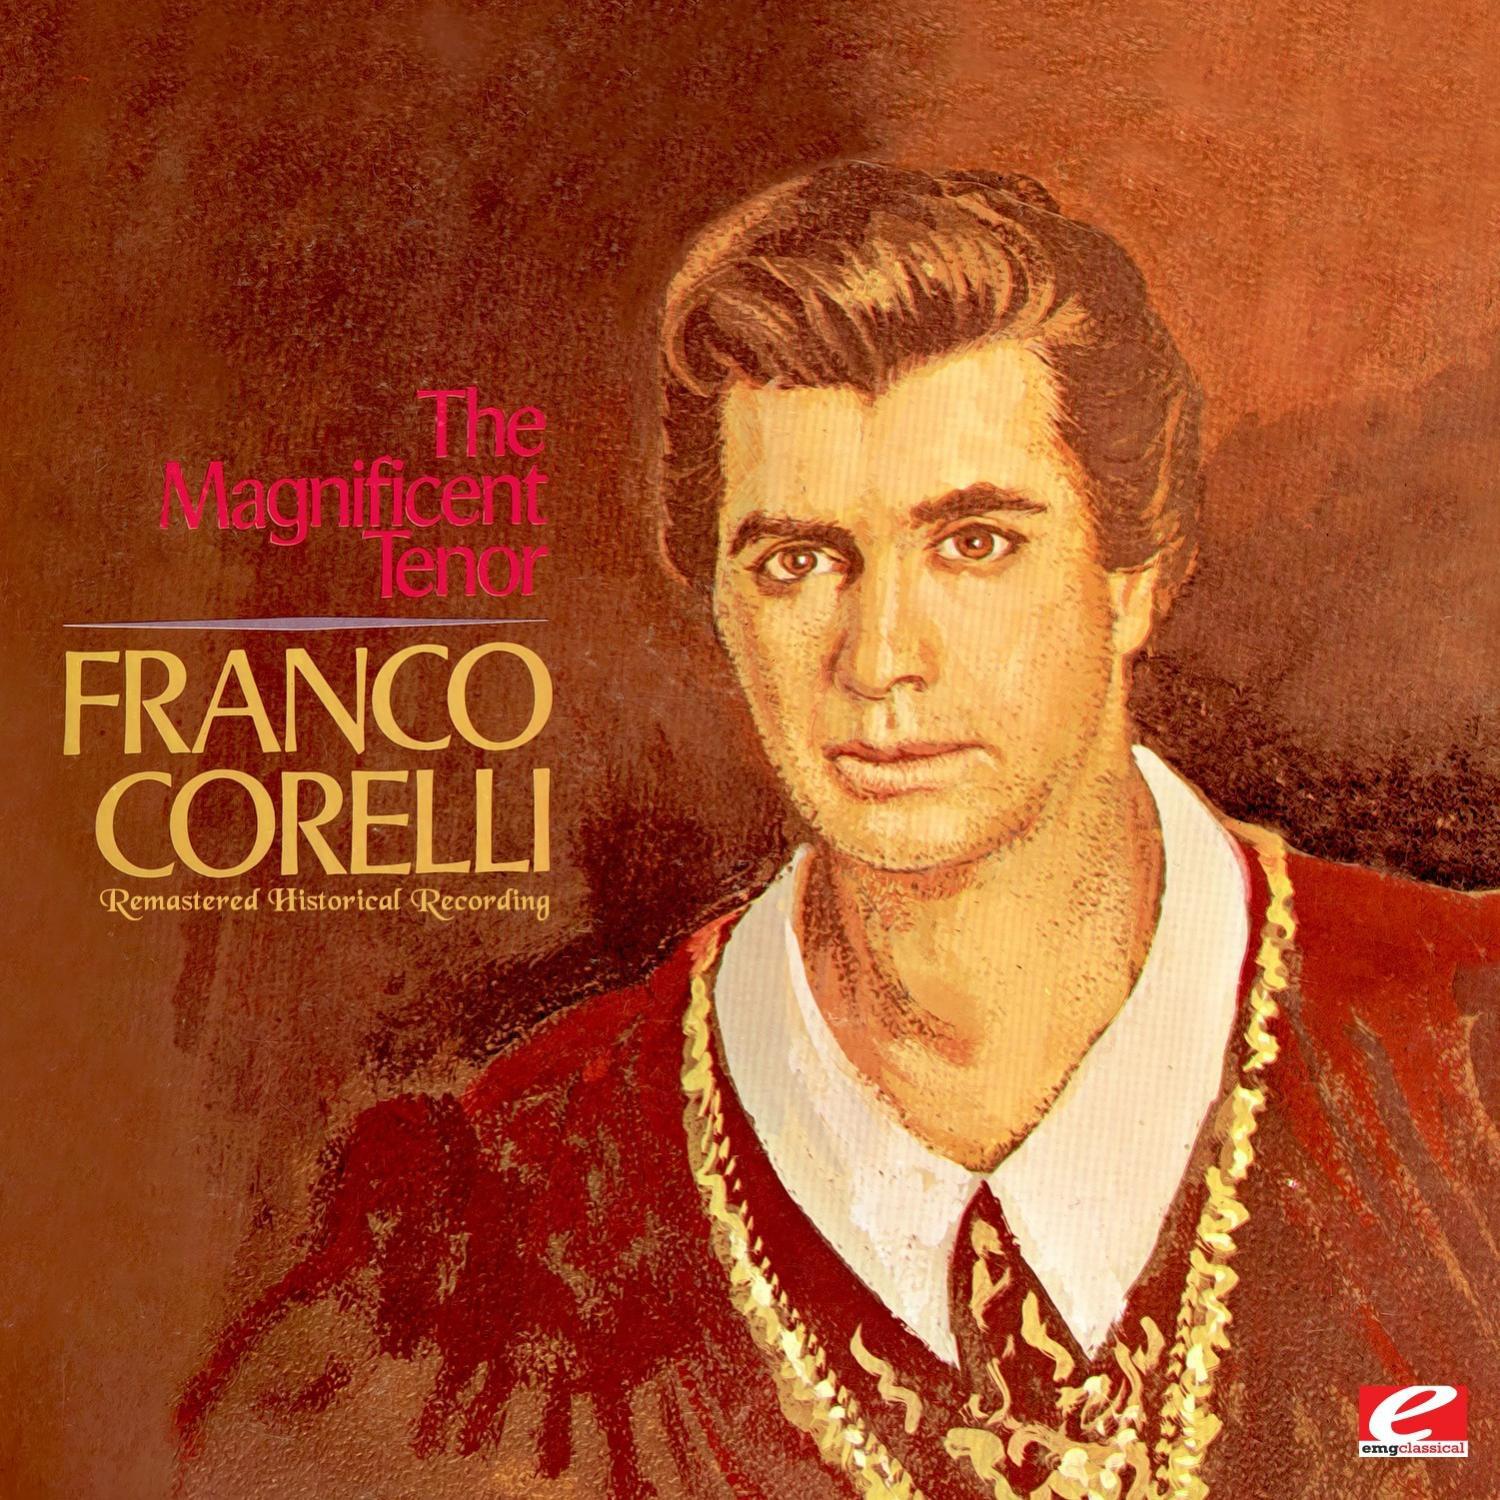 The Magnificent Tenor (Remastered Historical Recording)